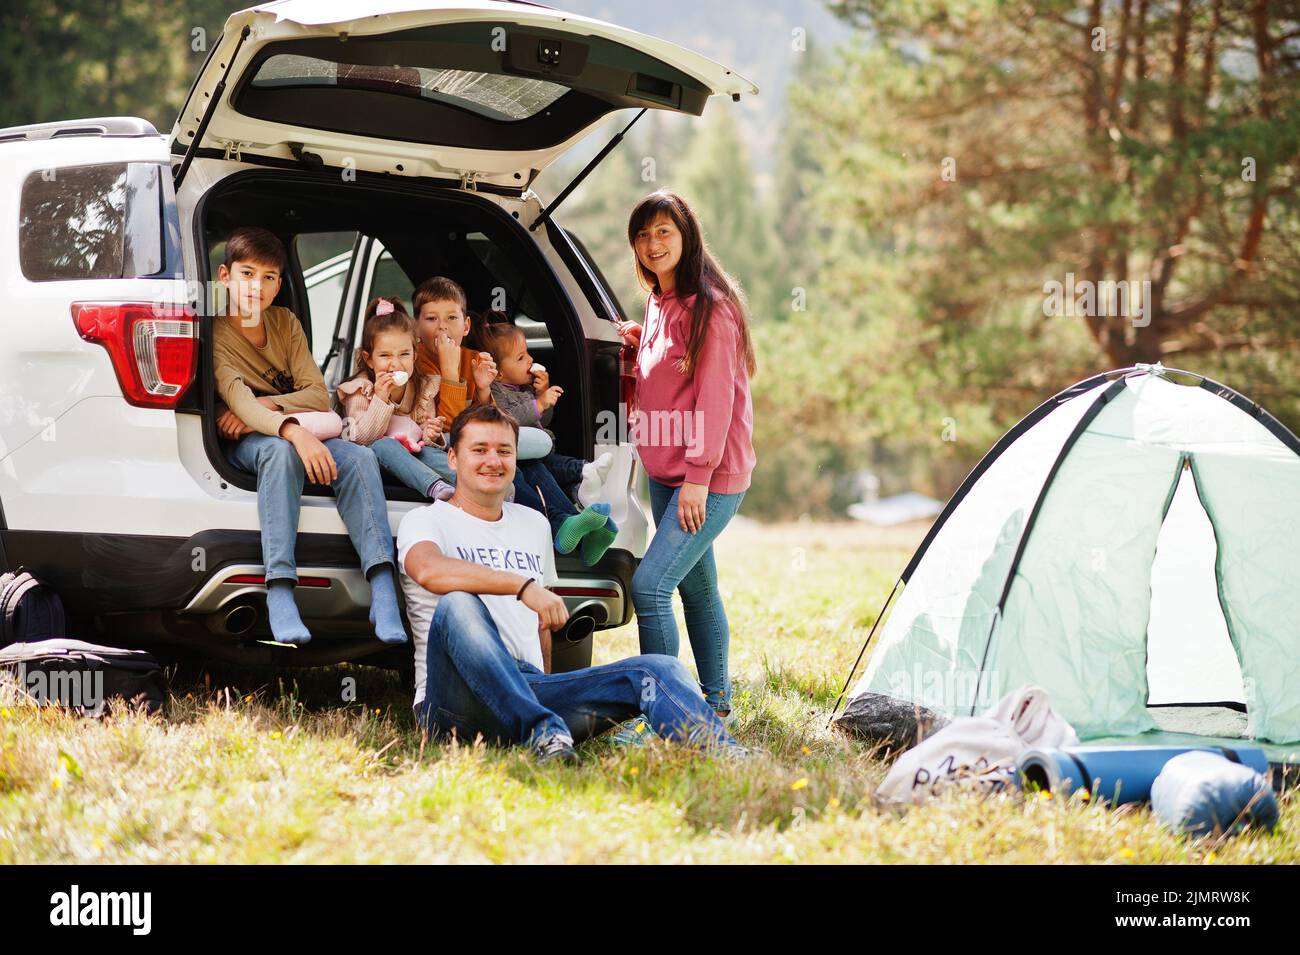 Large family of four kids. Children in trunk. Traveling by car in the mountains, atmosphere concept. American spirit. Stock Photo